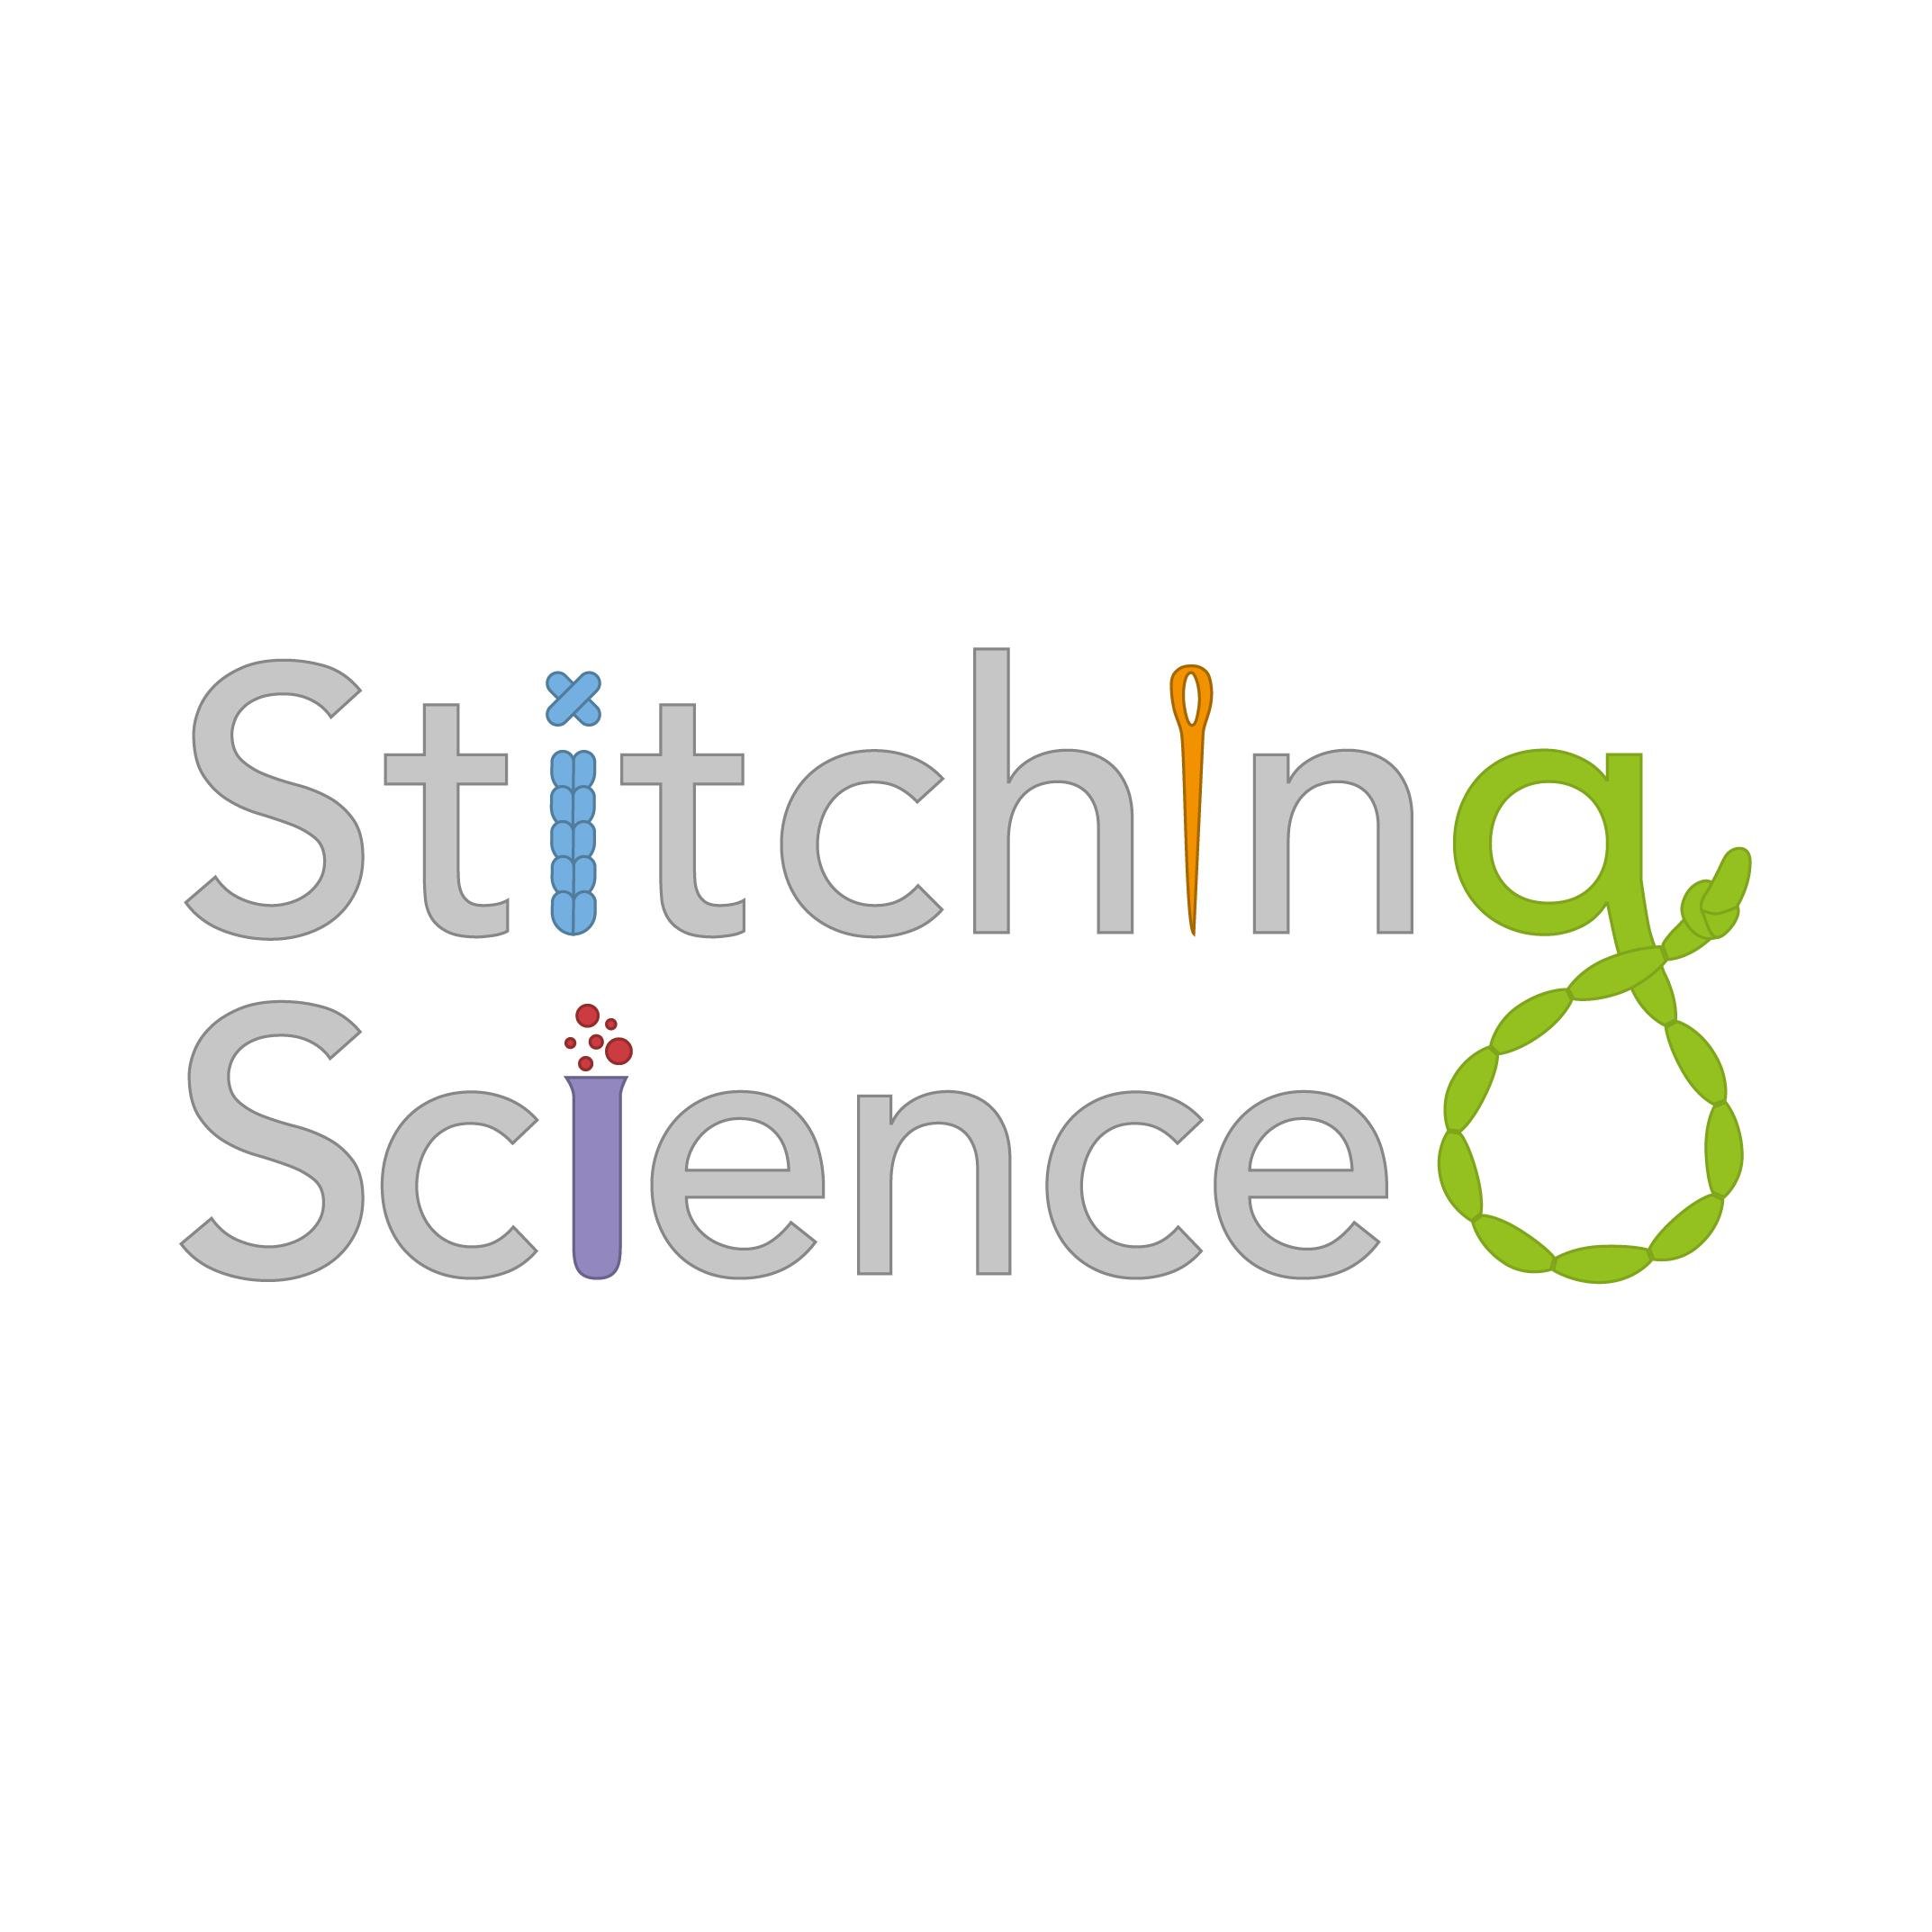 Communicating science and learning to craft. Sharing research from @GurdonInstitute via the medium of crochet! For more info: stitchingscience@gurdon.cam.ac.uk